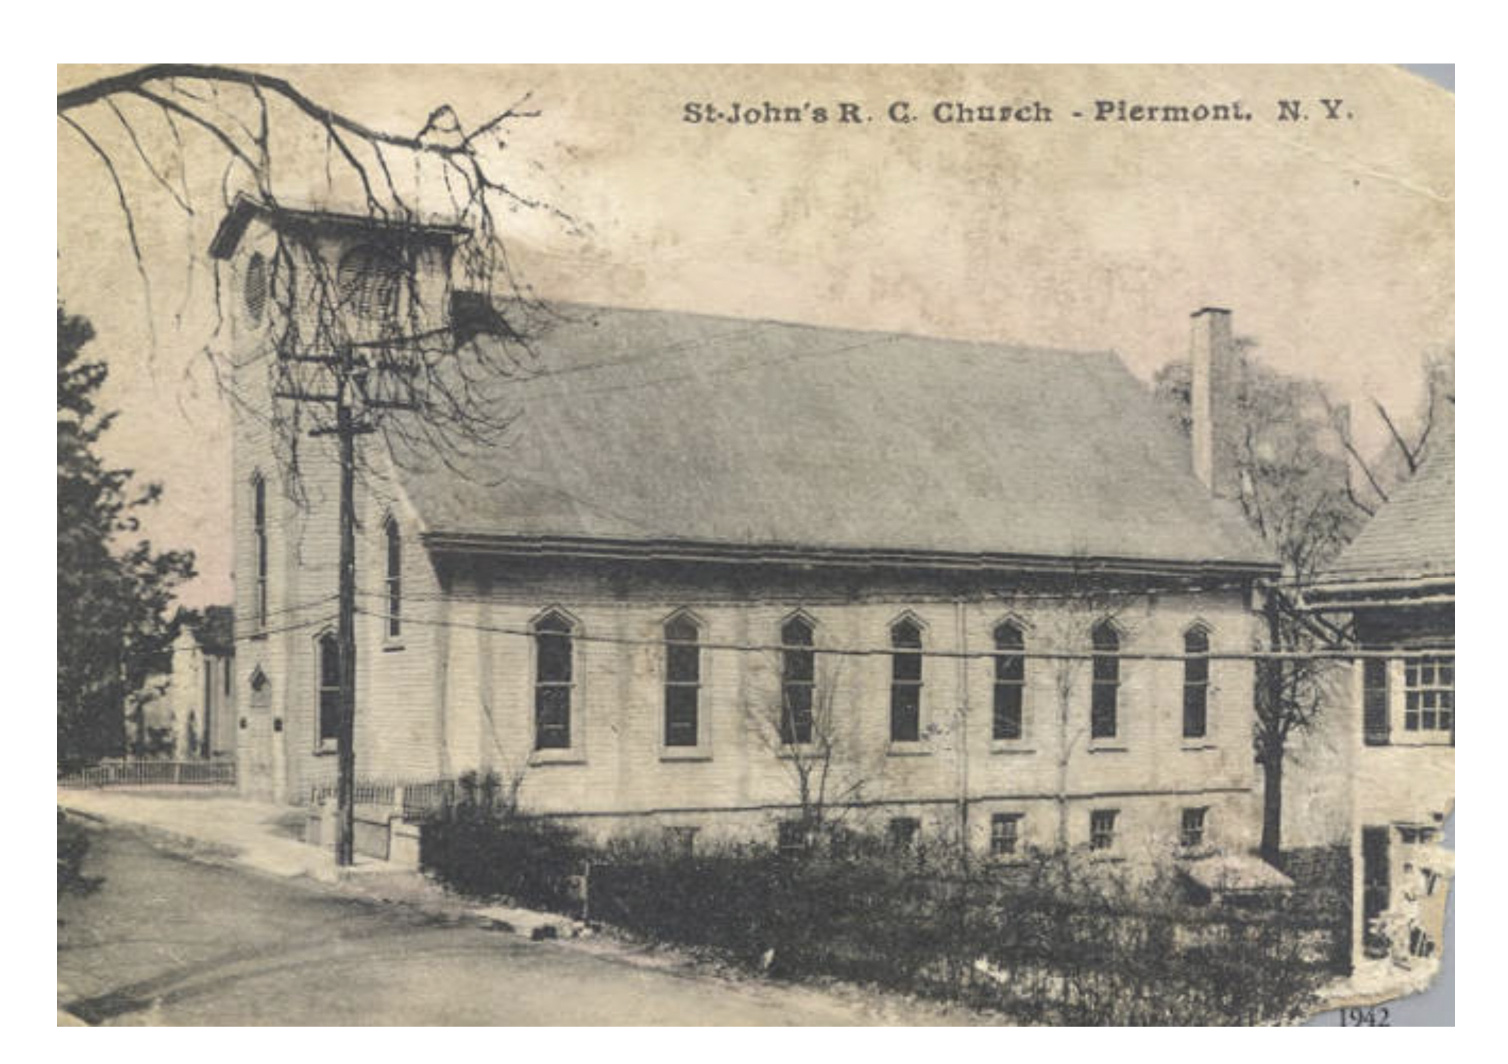 A historic photo of St. John’s R.C. Church, Piermont, New York, which featured large in the Nelligan family story.